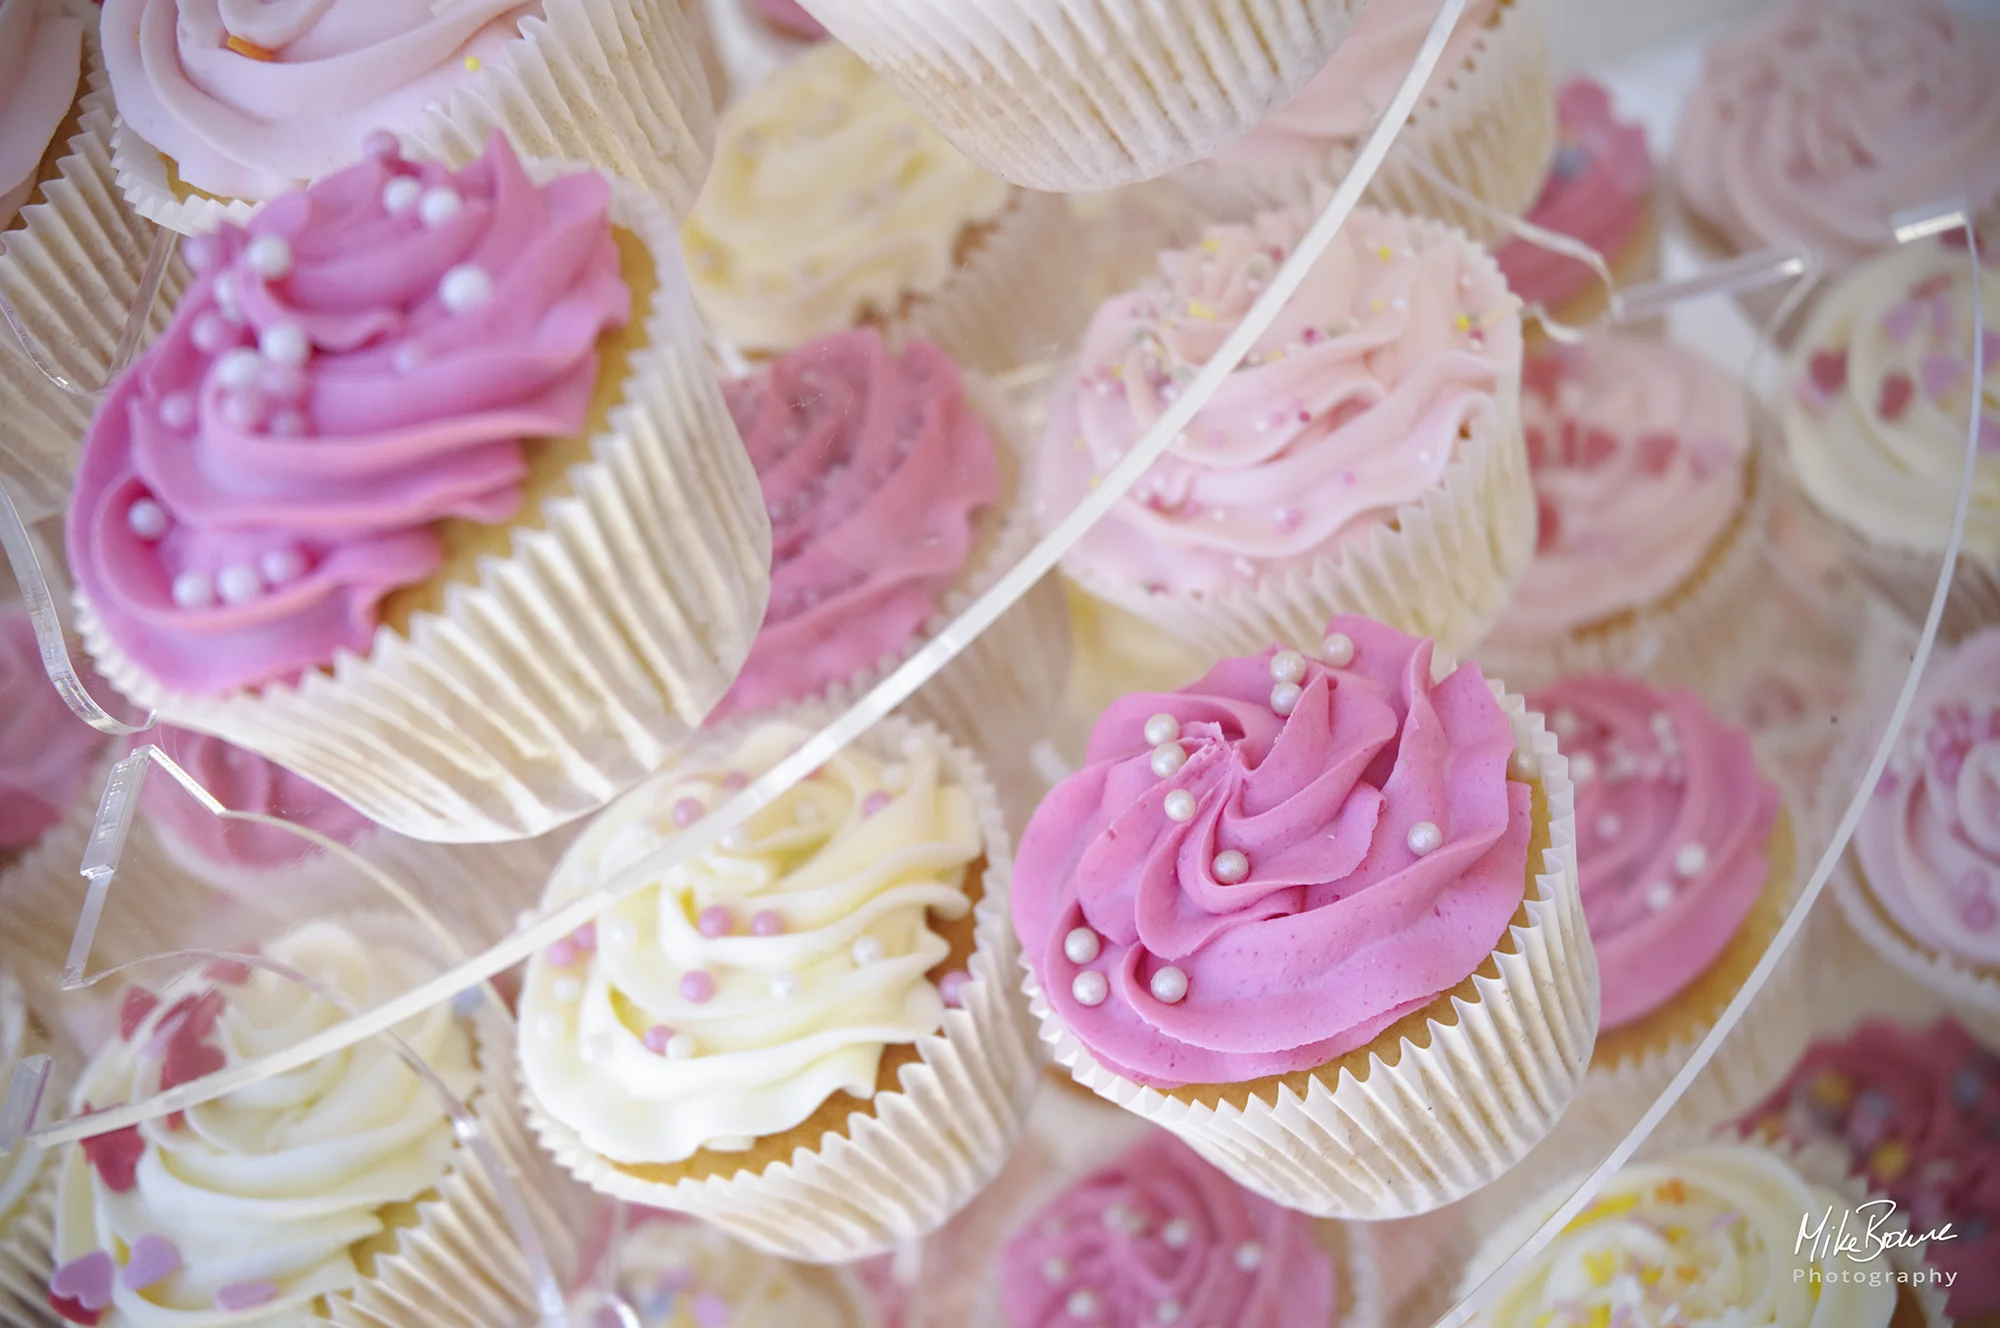 pink and yellow iced cup cakes decorated with silver sugar balls